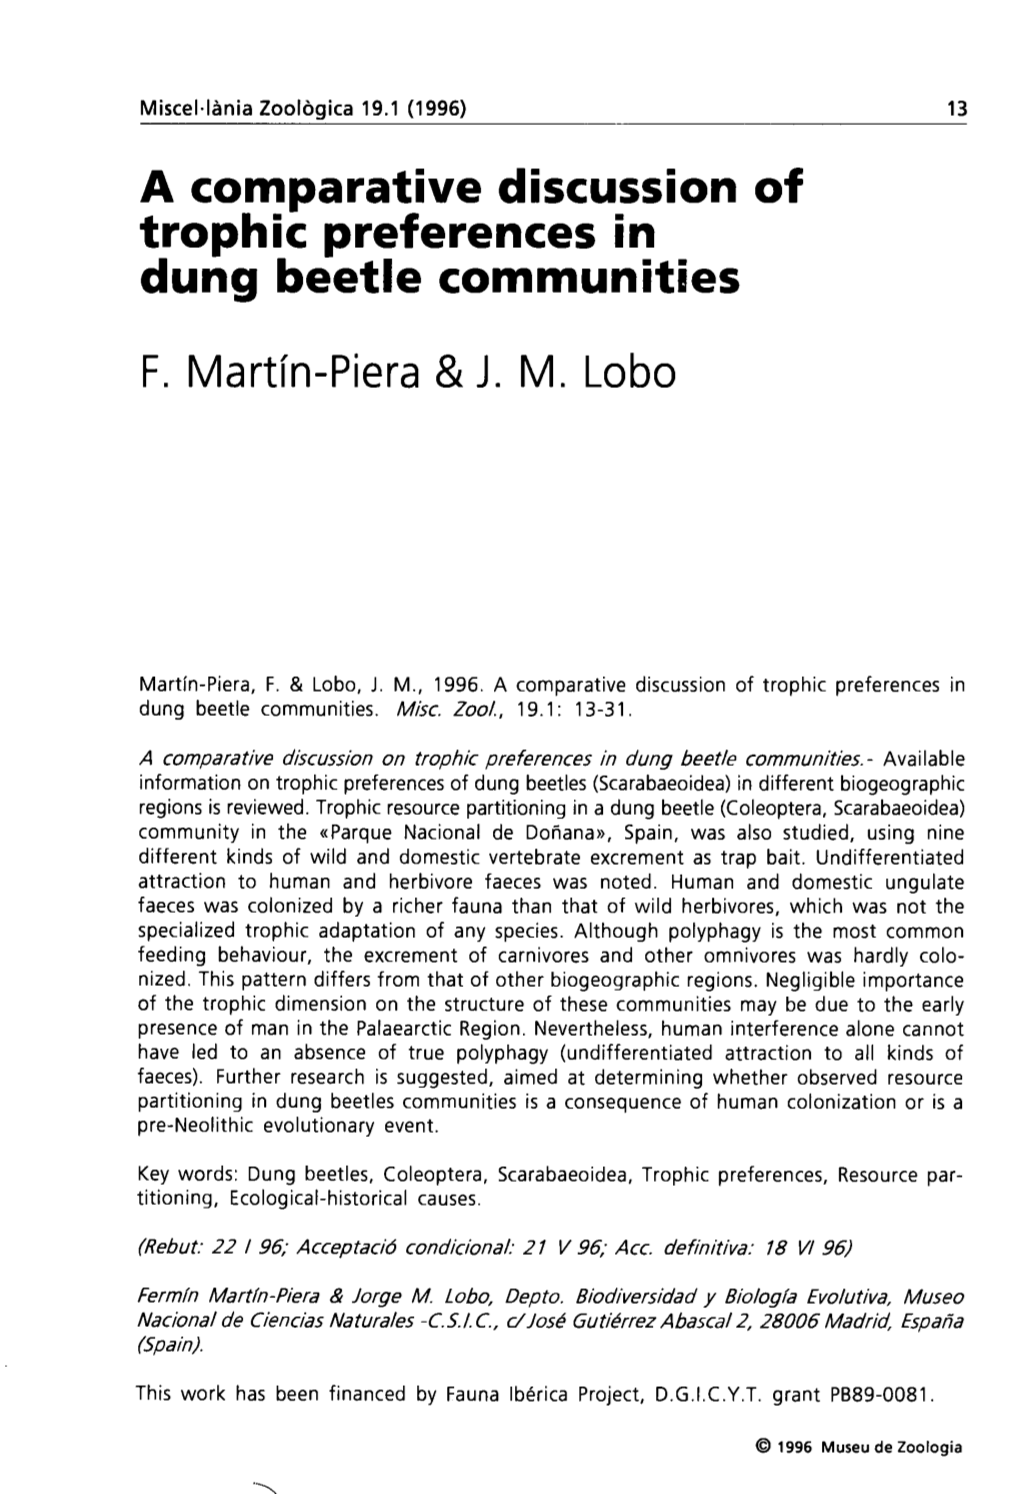 A Comparative Discussion of Trophic Preferences in Dung Beetle Communities